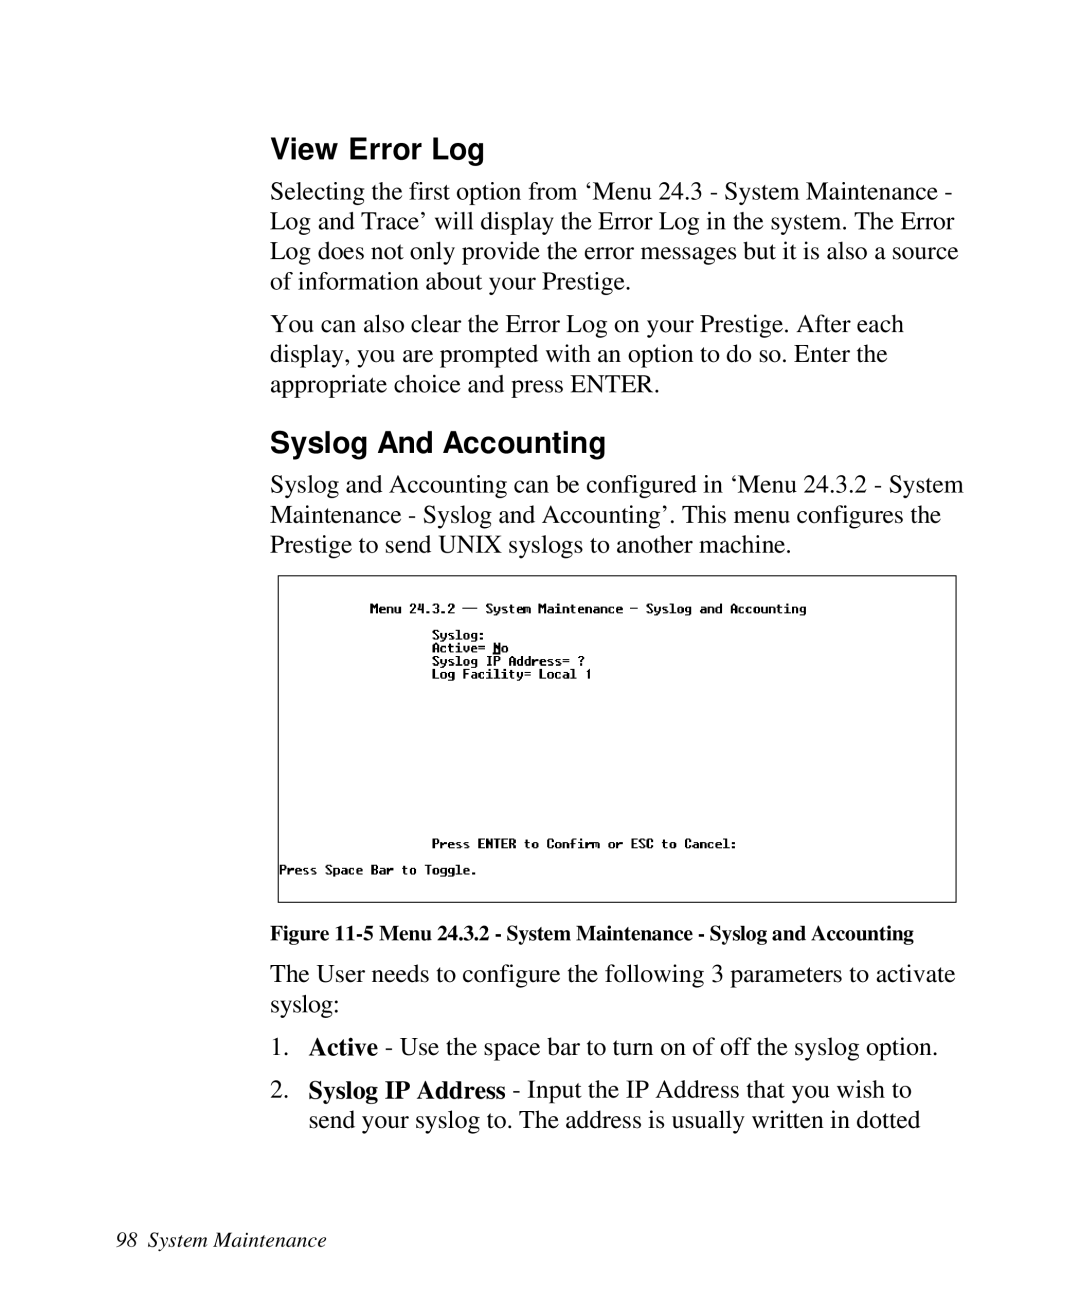 ZyXEL Communications Prestige100 user manual View Error Log, Syslog And Accounting 